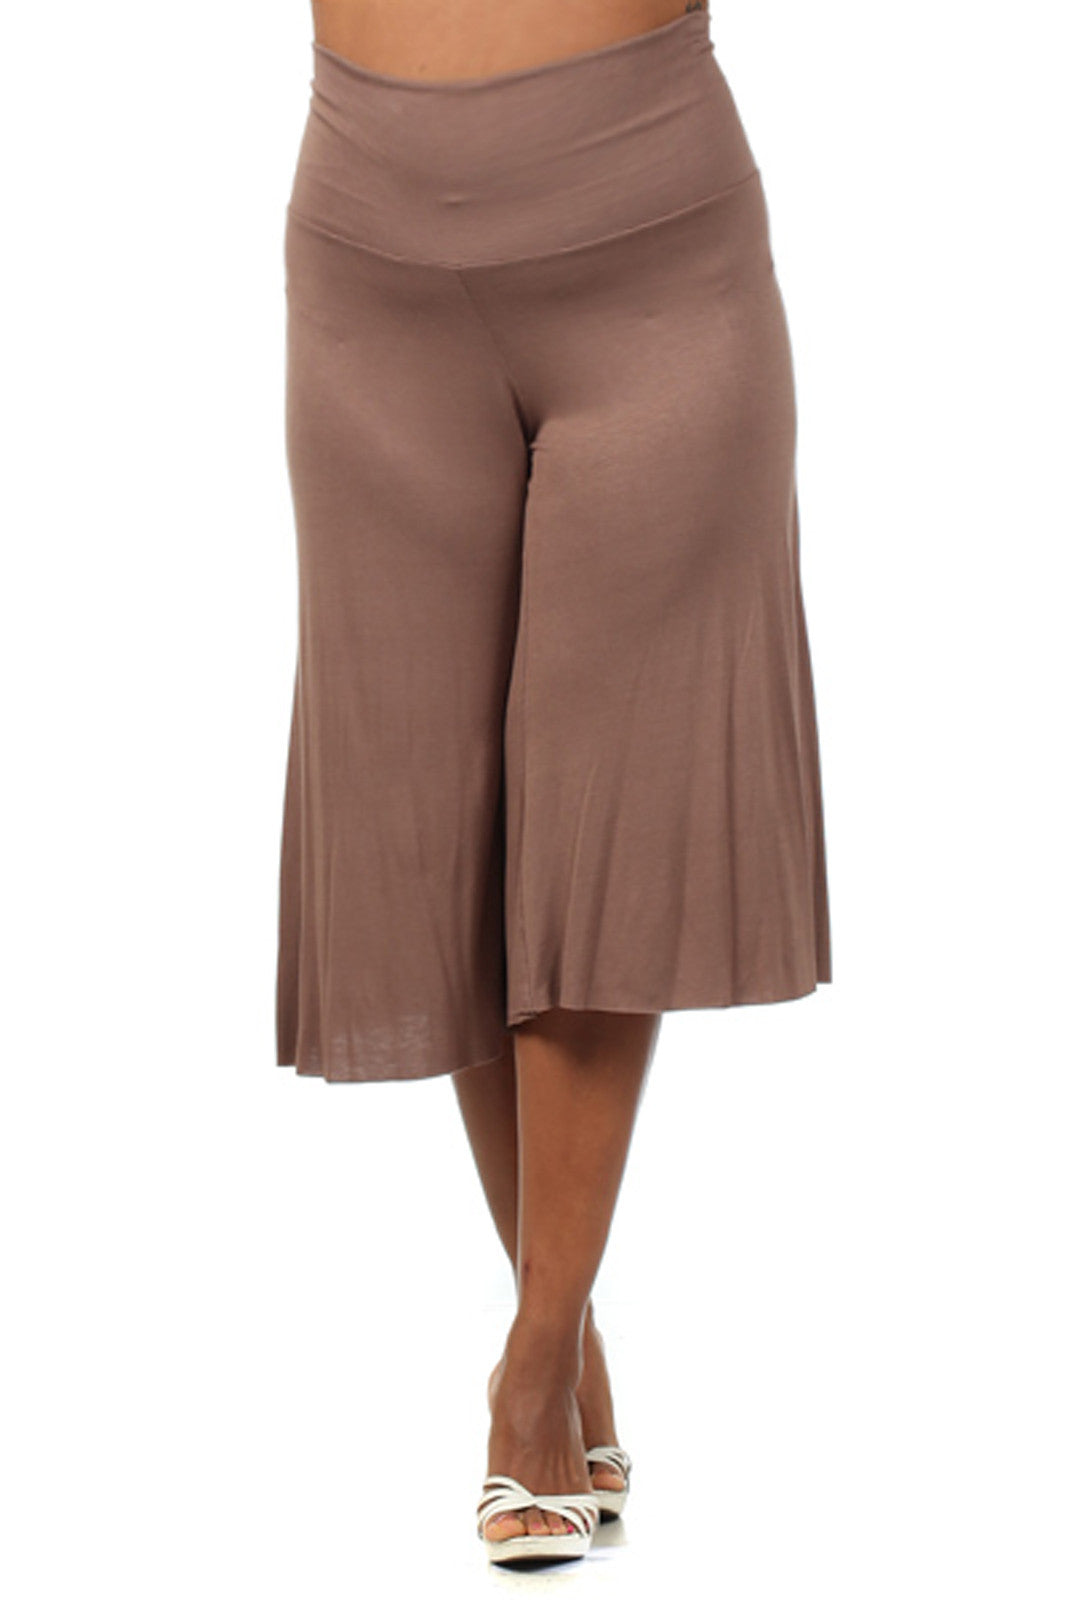 Plus Size Gaucho Pants – Mommylicious